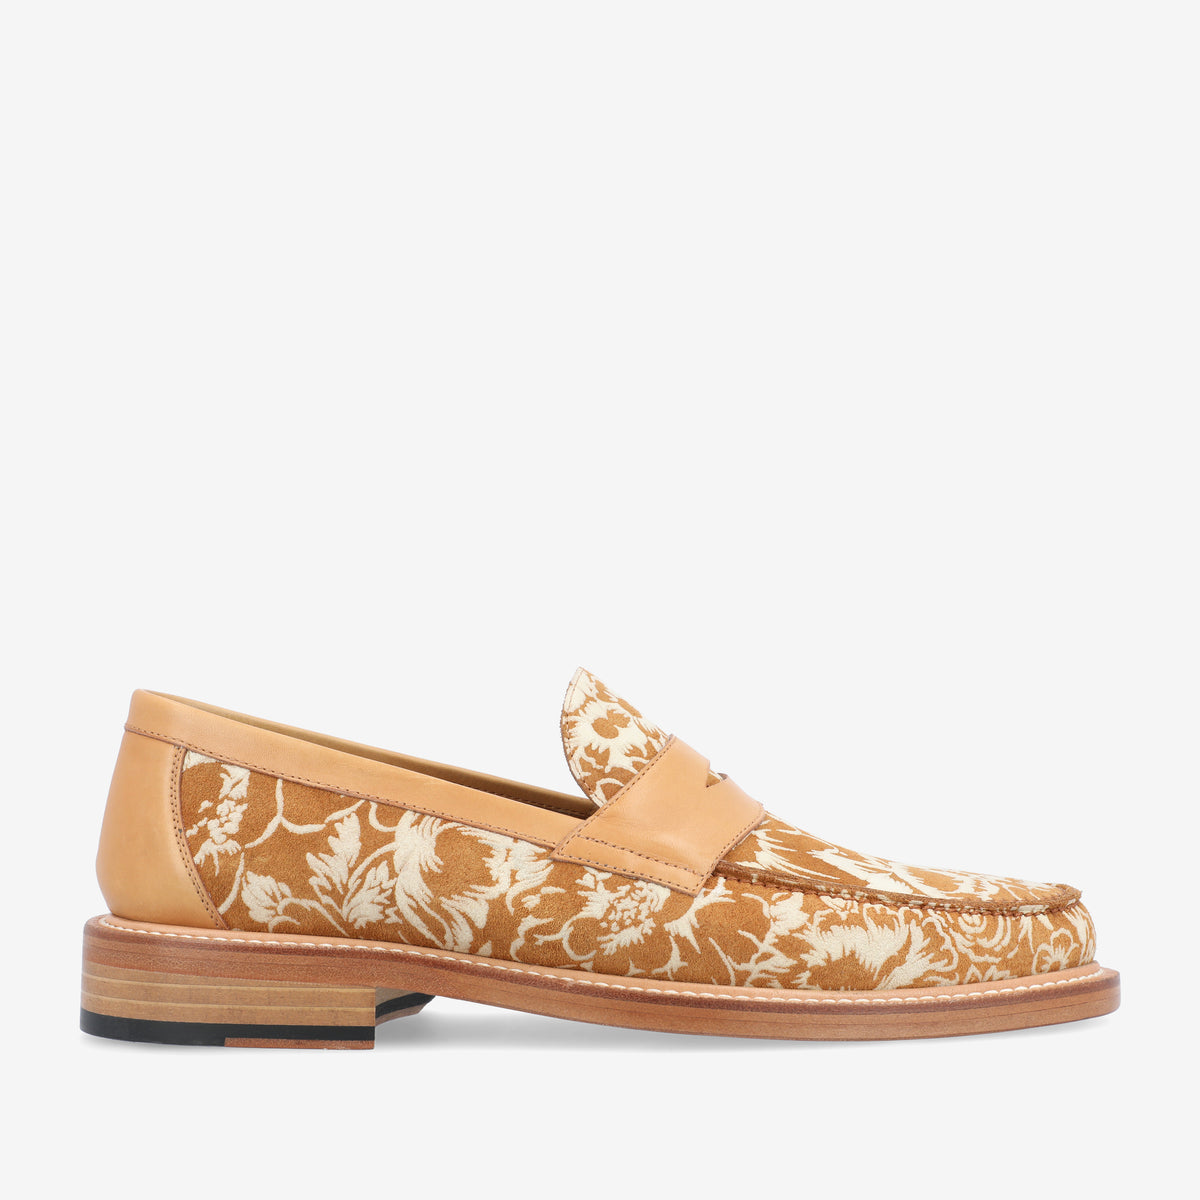 The Fitz Loafer in Floral (Last Chance, Final Sale)